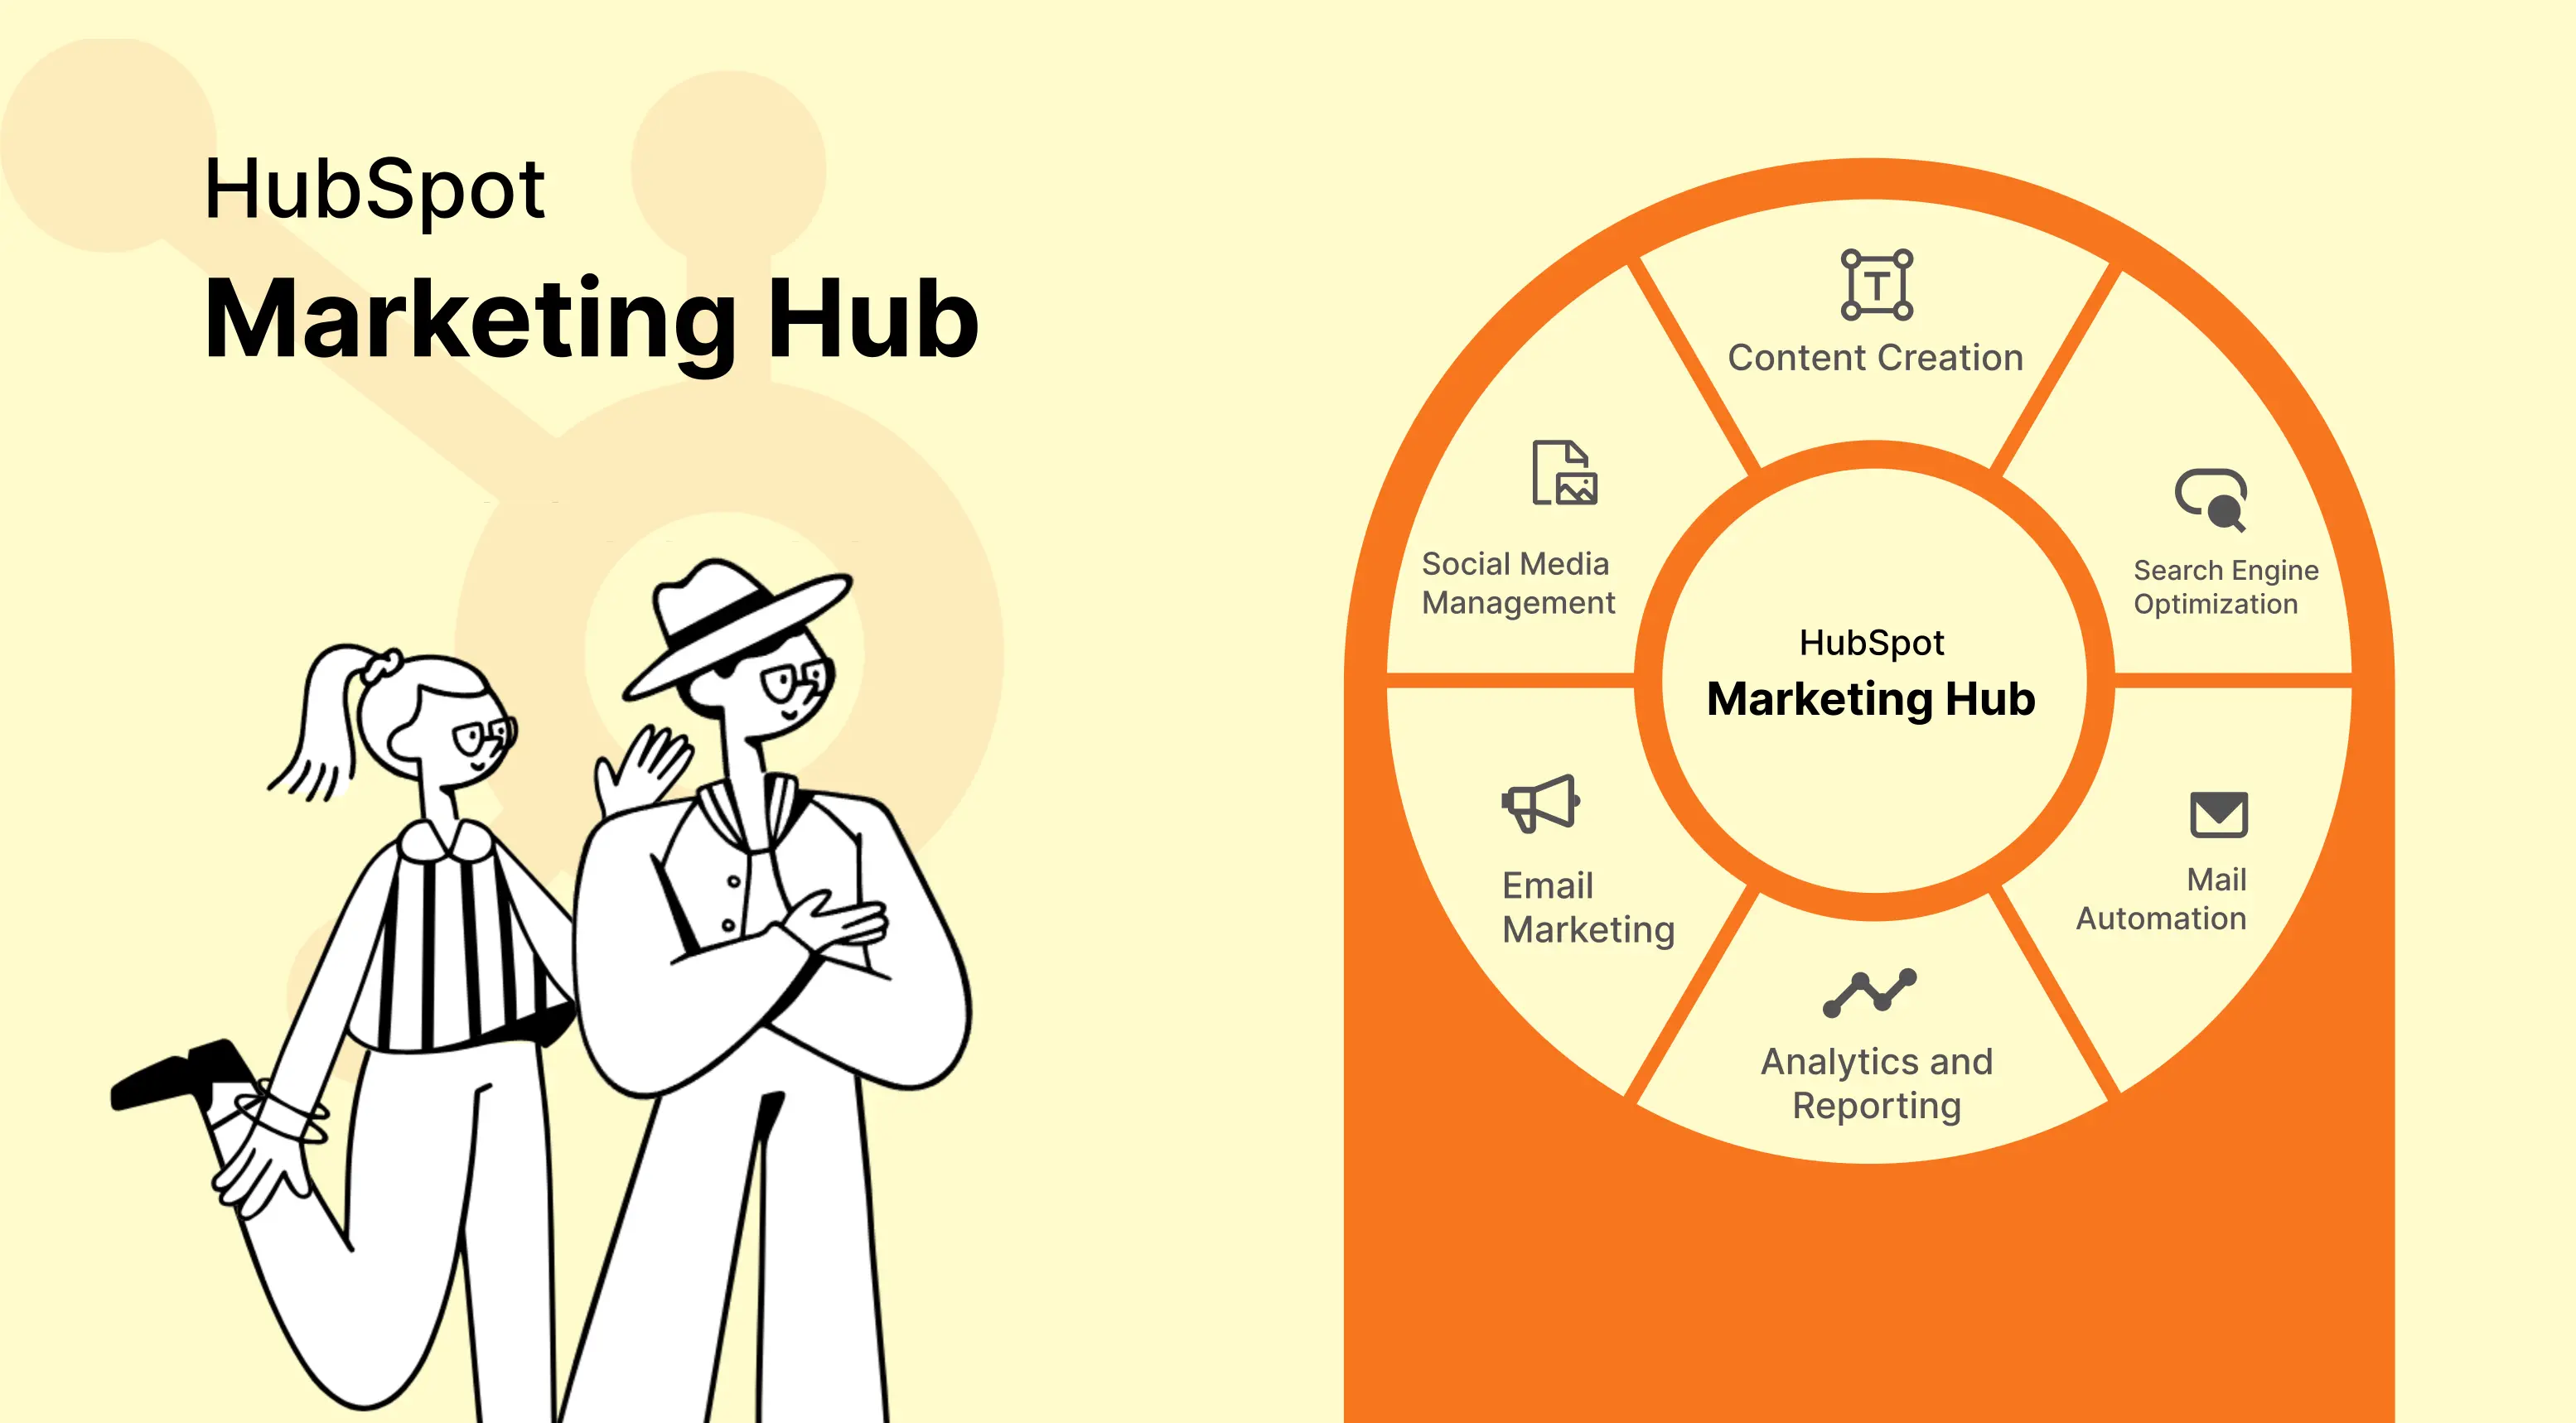 Leverage the Benefits of Business and Enterprise Plans on HubSpot